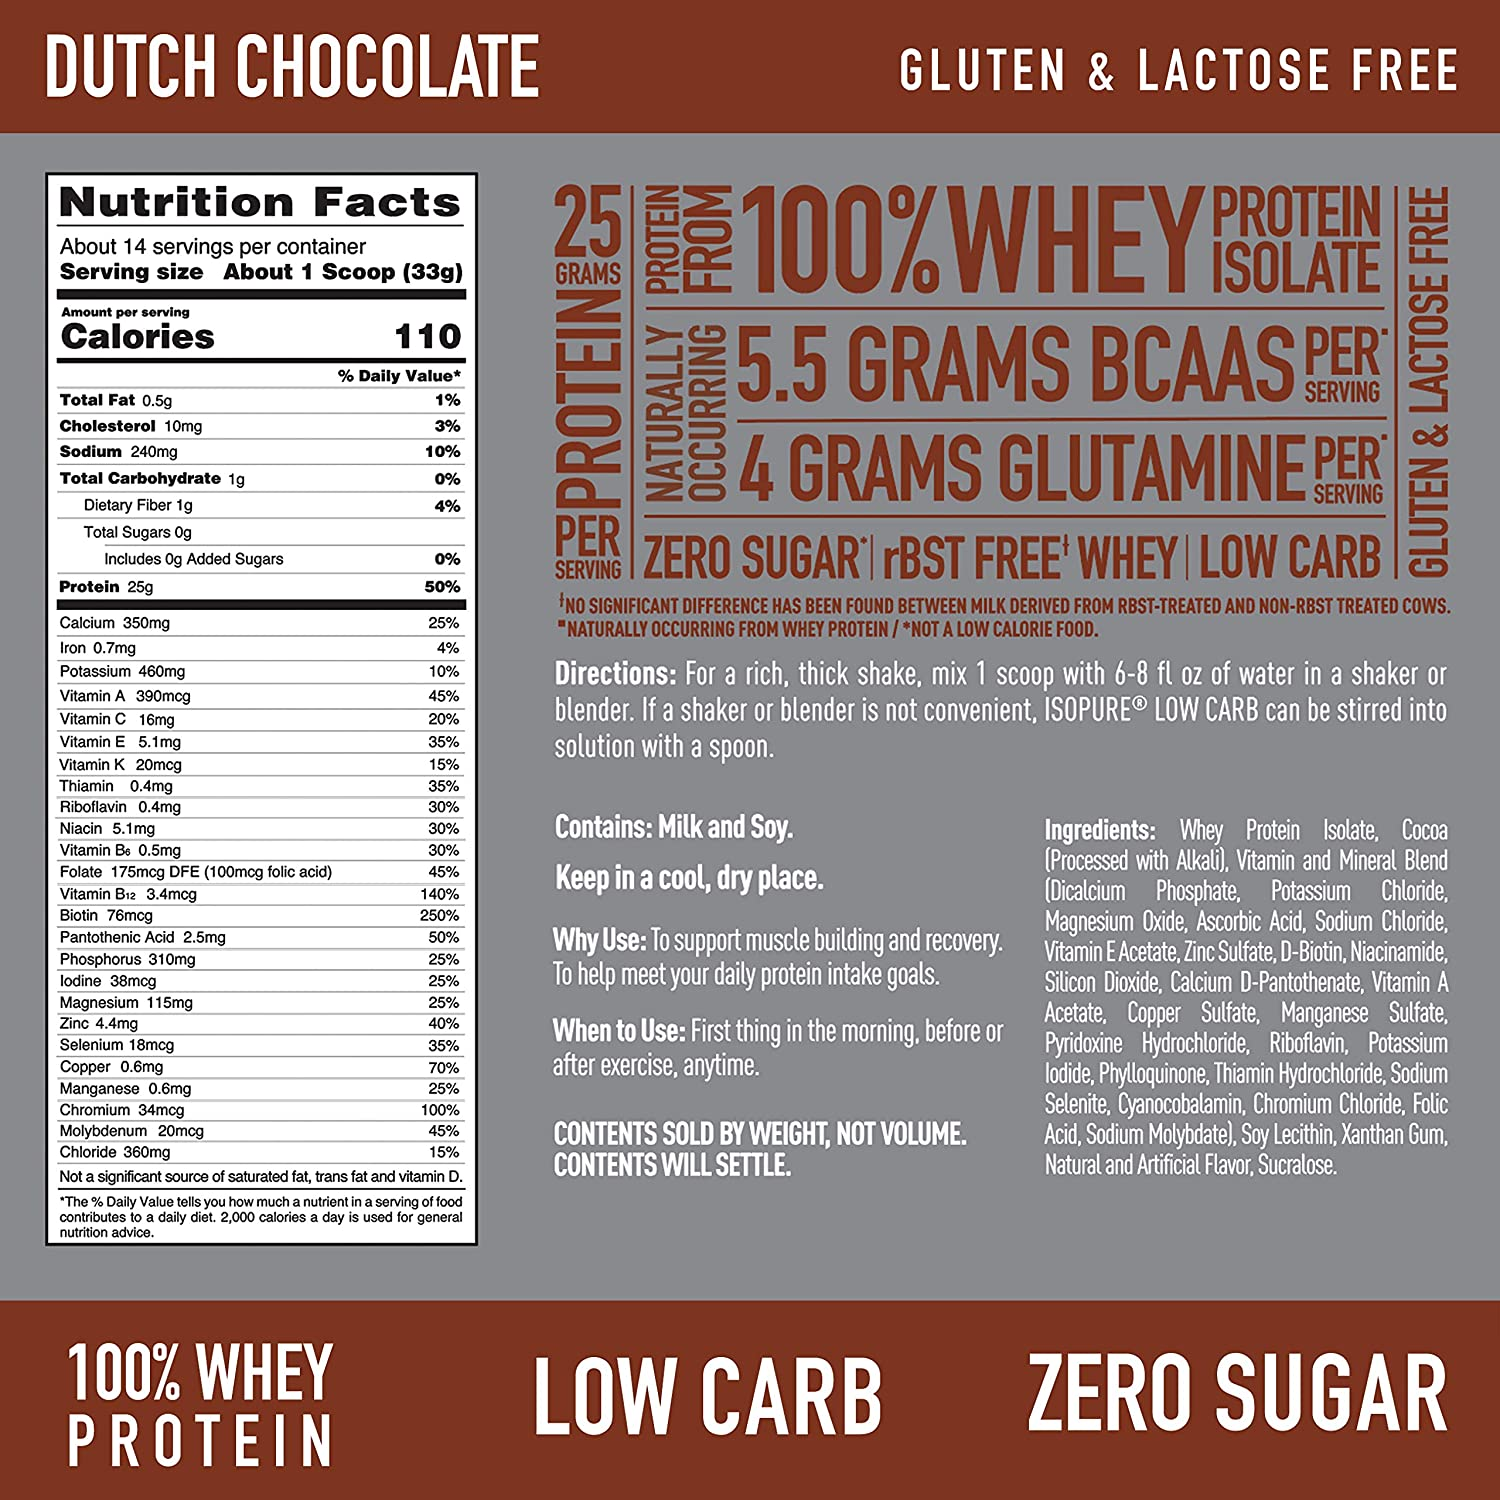 Isopure Low Carb, Vitamin C and Zinc for Immune Support, 25G Protein, Keto Friendly Protein Powder, 100% Whey Protein Isolate, Flavor: Dutch Chocolate, 1 Pound (Packaging May Vary)